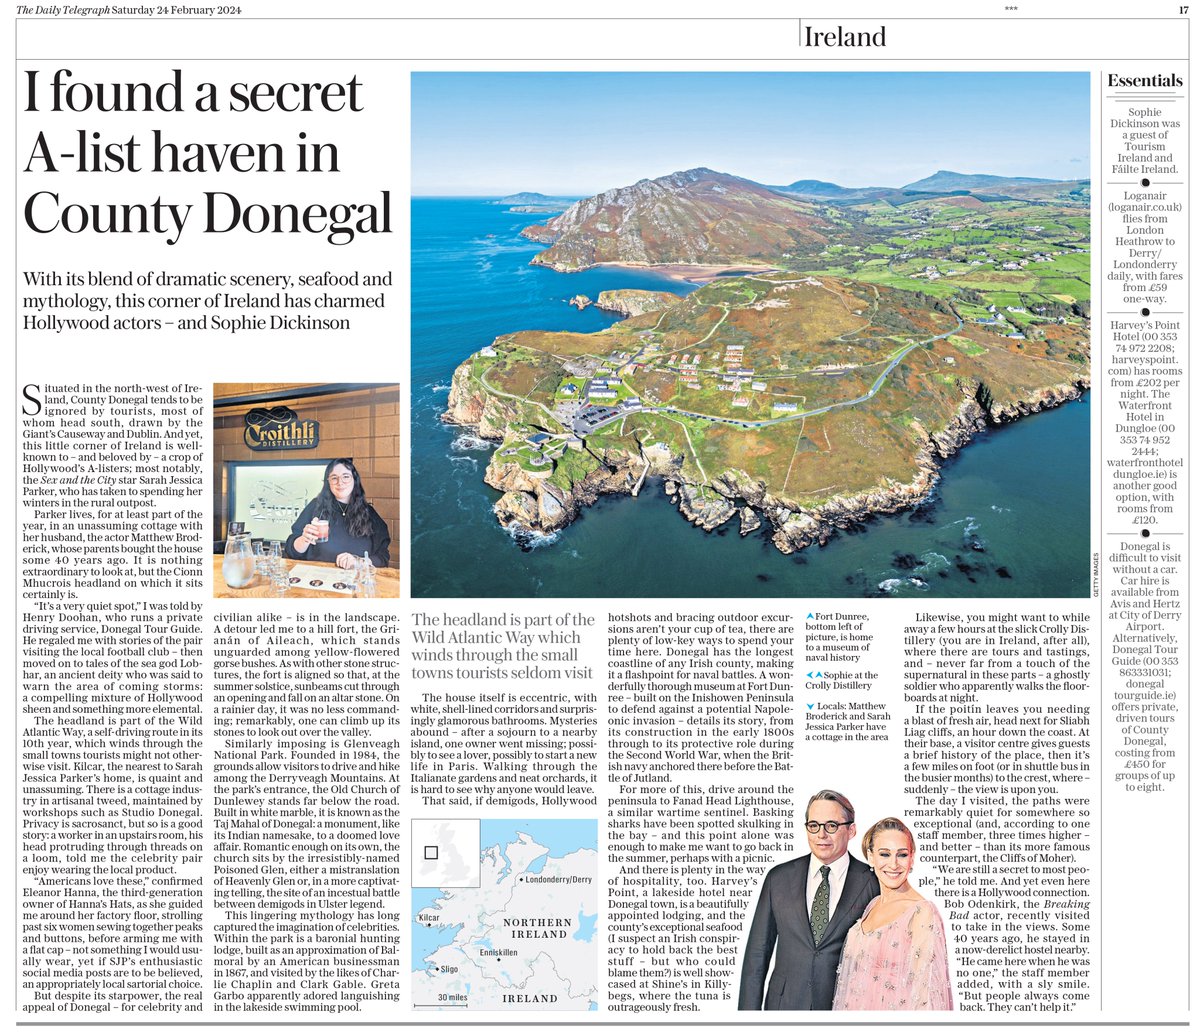 “I found a secret A-list haven in County Donegal”, writes Sophie Dickinson for @TelegraphTravel – following her visit to Donegal earlier this month, hosted in conjunction with @Failte_Ireland. Follow the link to read online: telegraph.co.uk/travel/destina… #TI2024